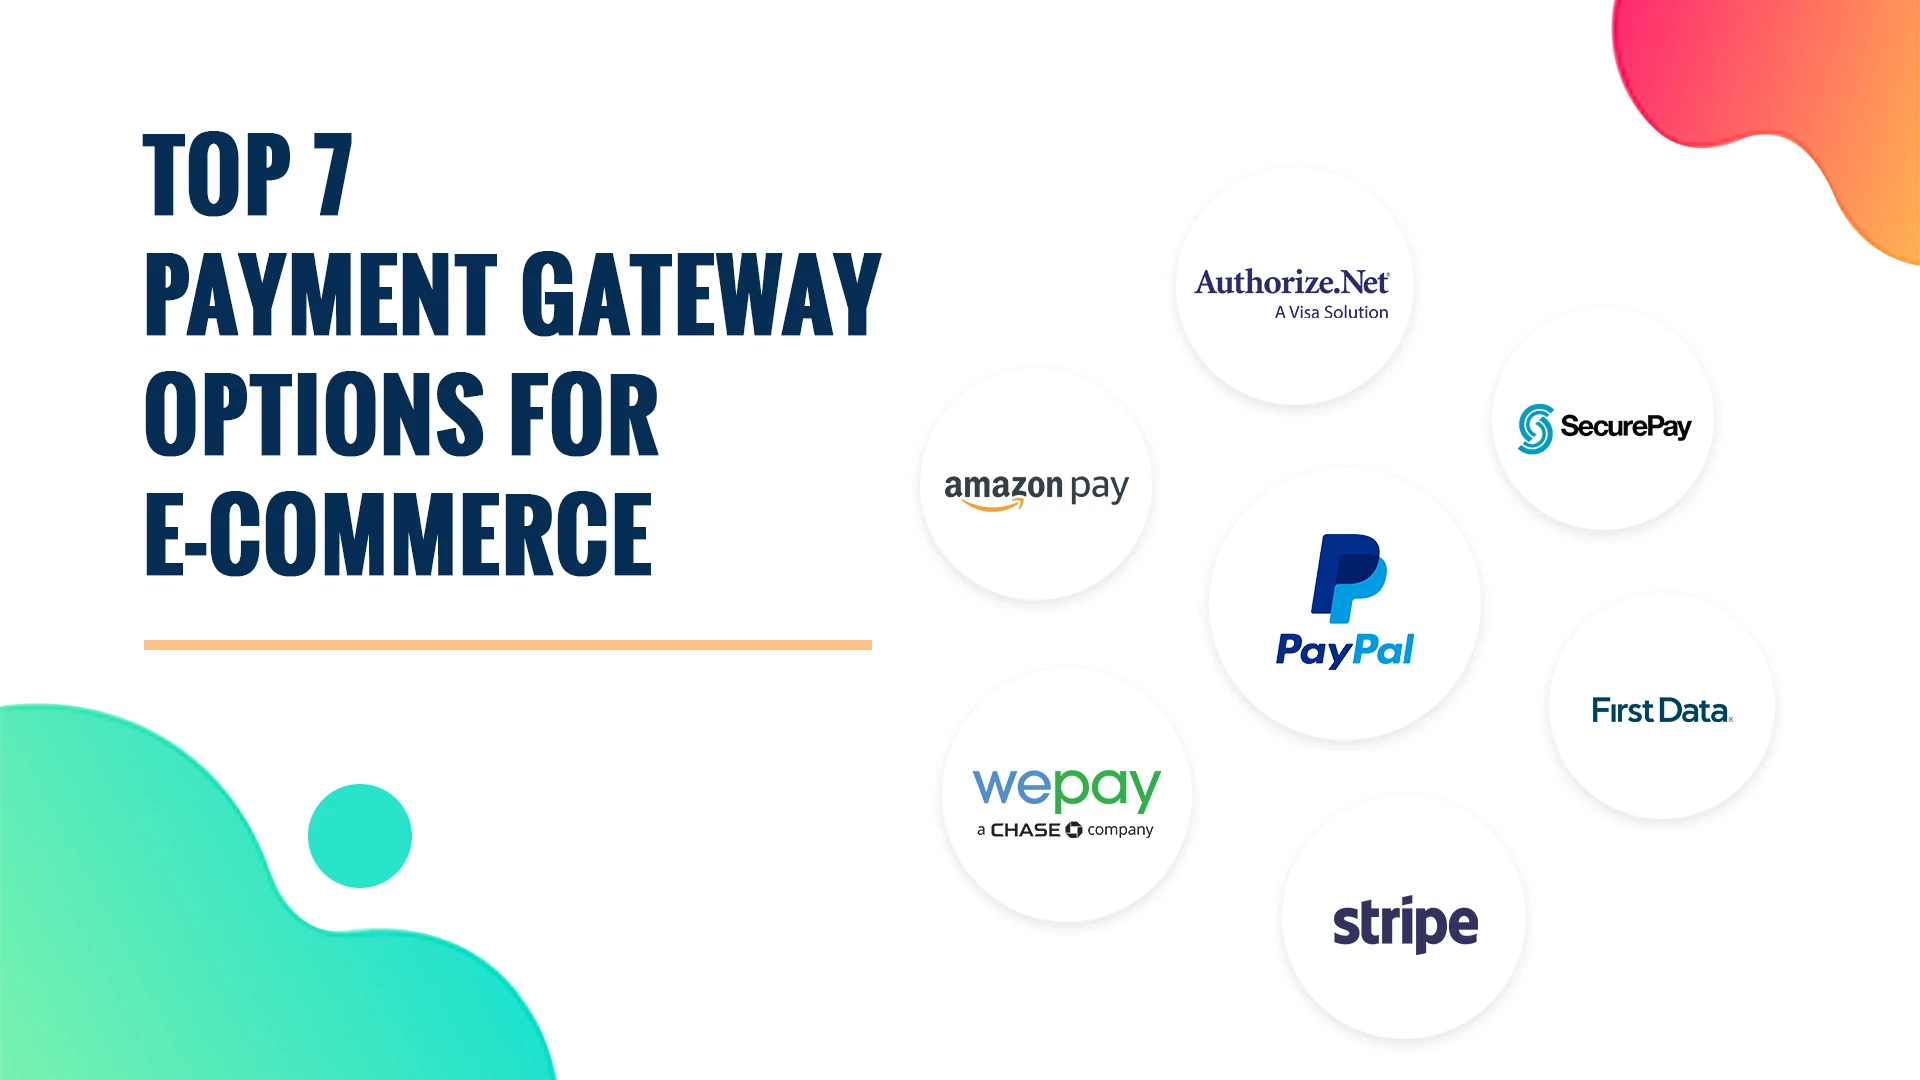 Top 7 Payment Gateway Options for e-commerce